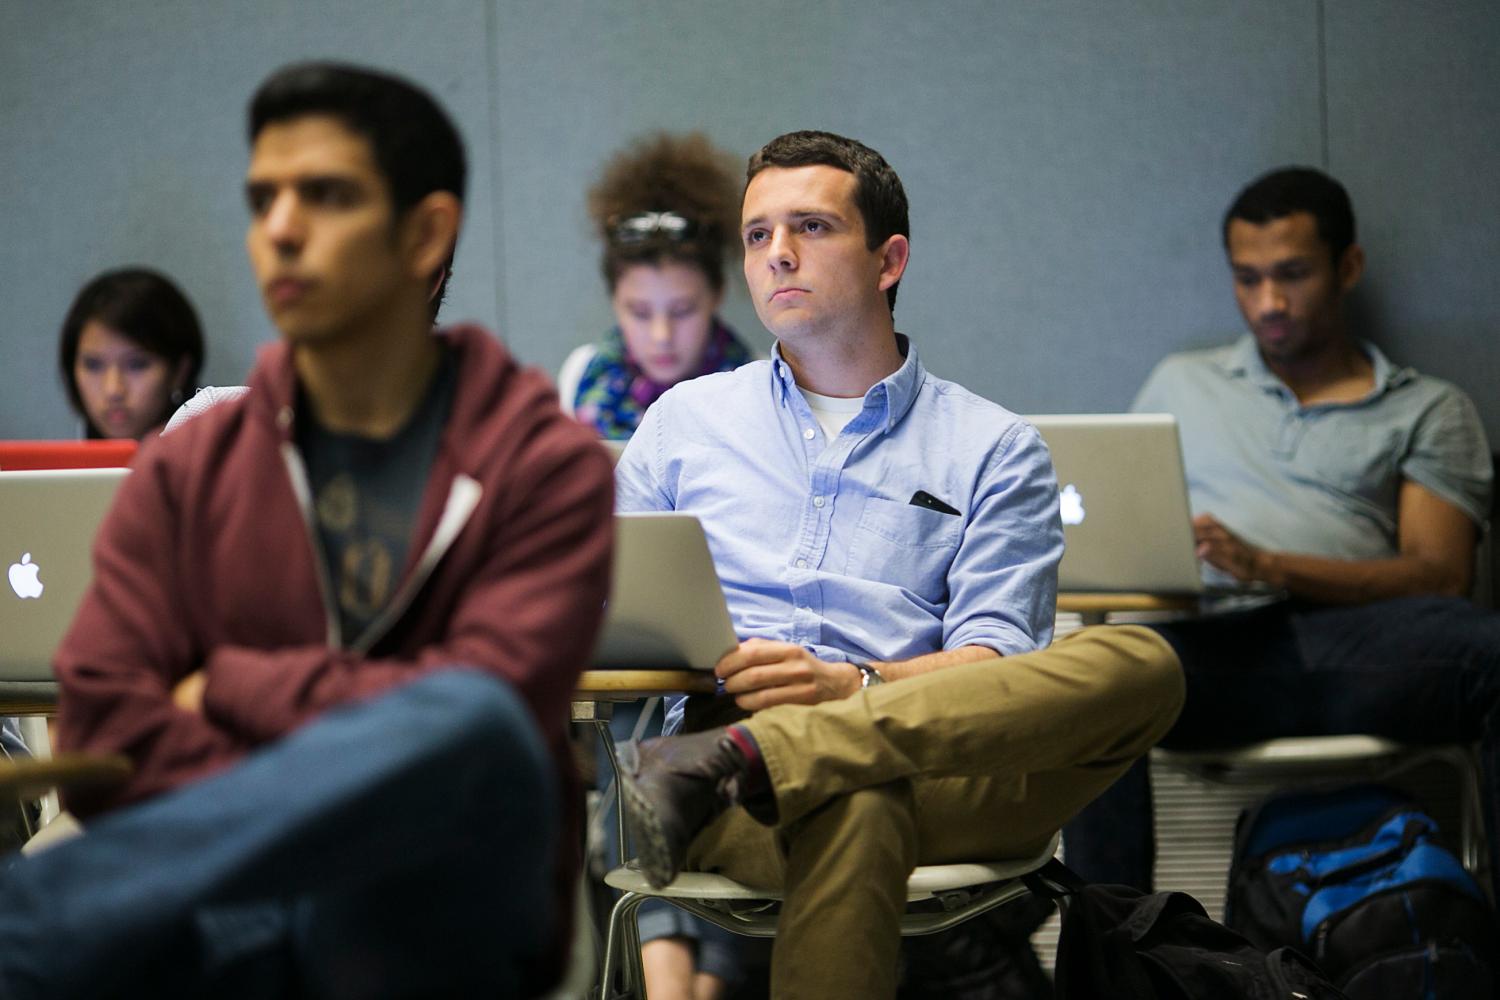 Students listen to a presentation while in class at Stanford University.,